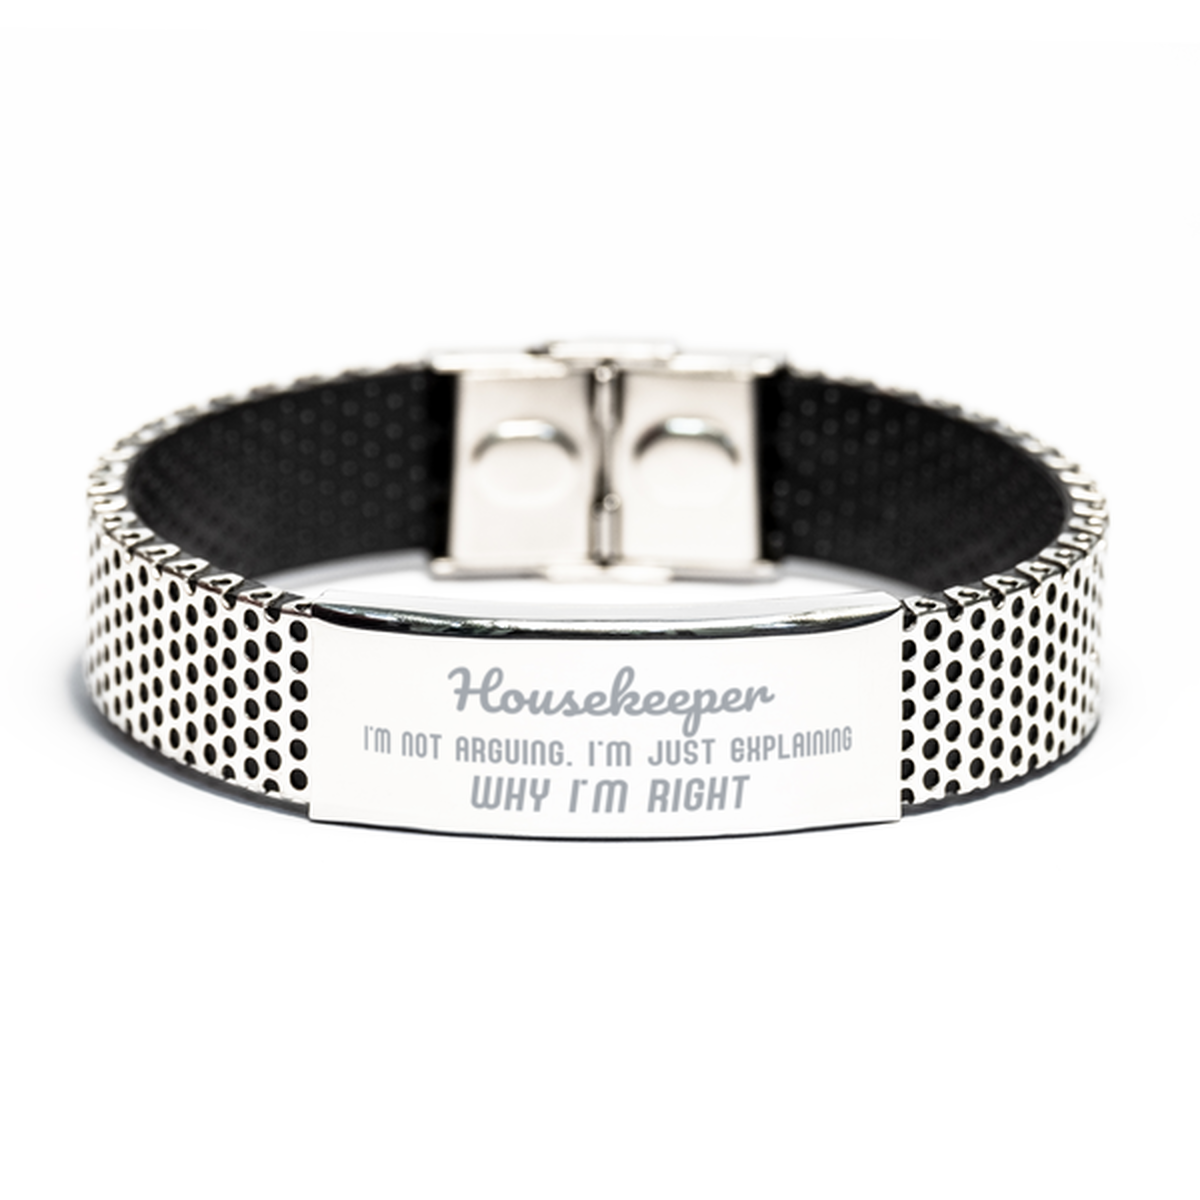 Housekeeper I'm not Arguing. I'm Just Explaining Why I'm RIGHT Stainless Steel Bracelet, Funny Saying Quote Housekeeper Gifts For Housekeeper Graduation Birthday Christmas Gifts for Men Women Coworker